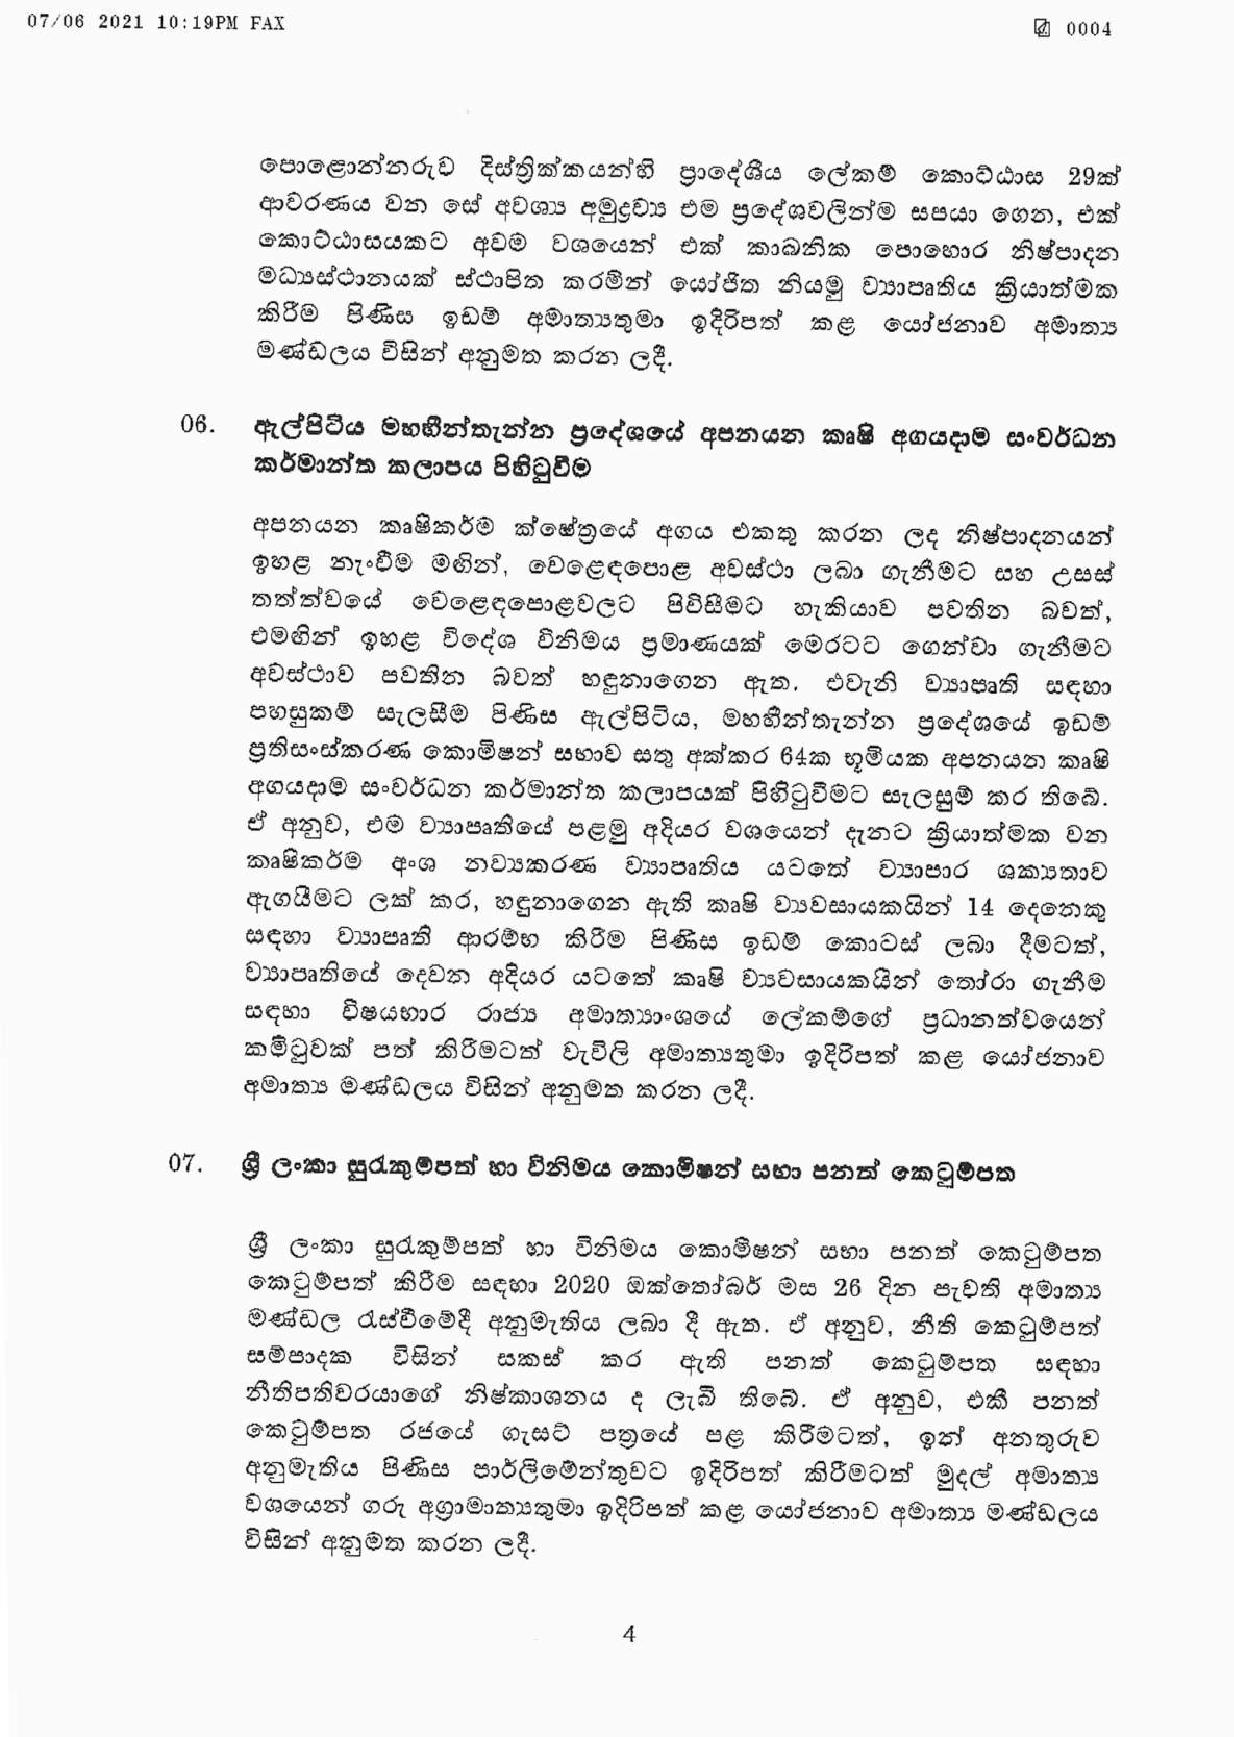 Cabinet Decisions on 07.06.2021 page 004